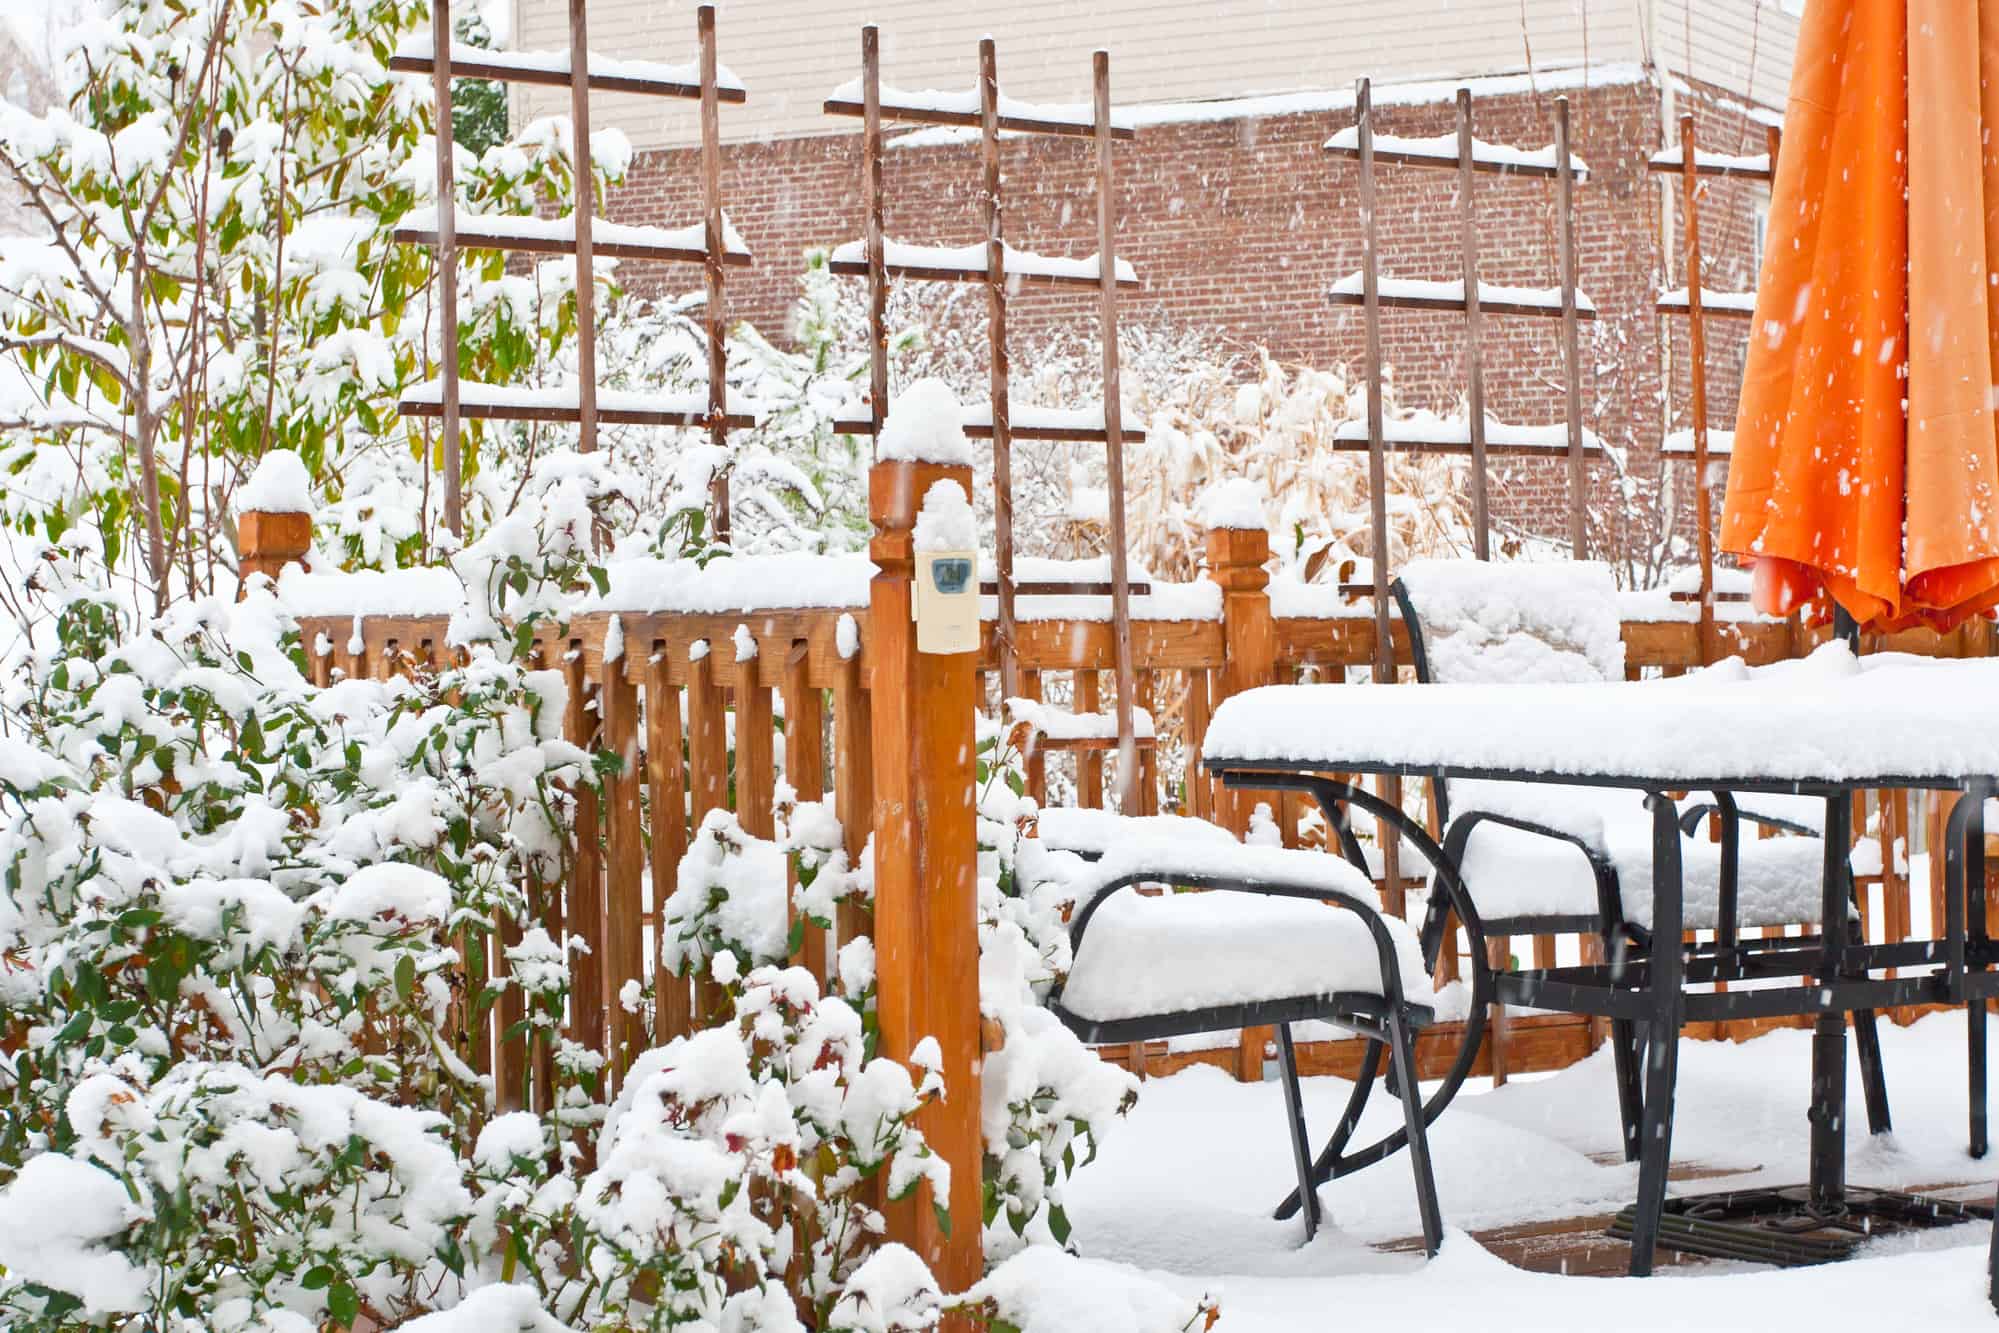 Should You Salt Your Patio to Melt Ice?